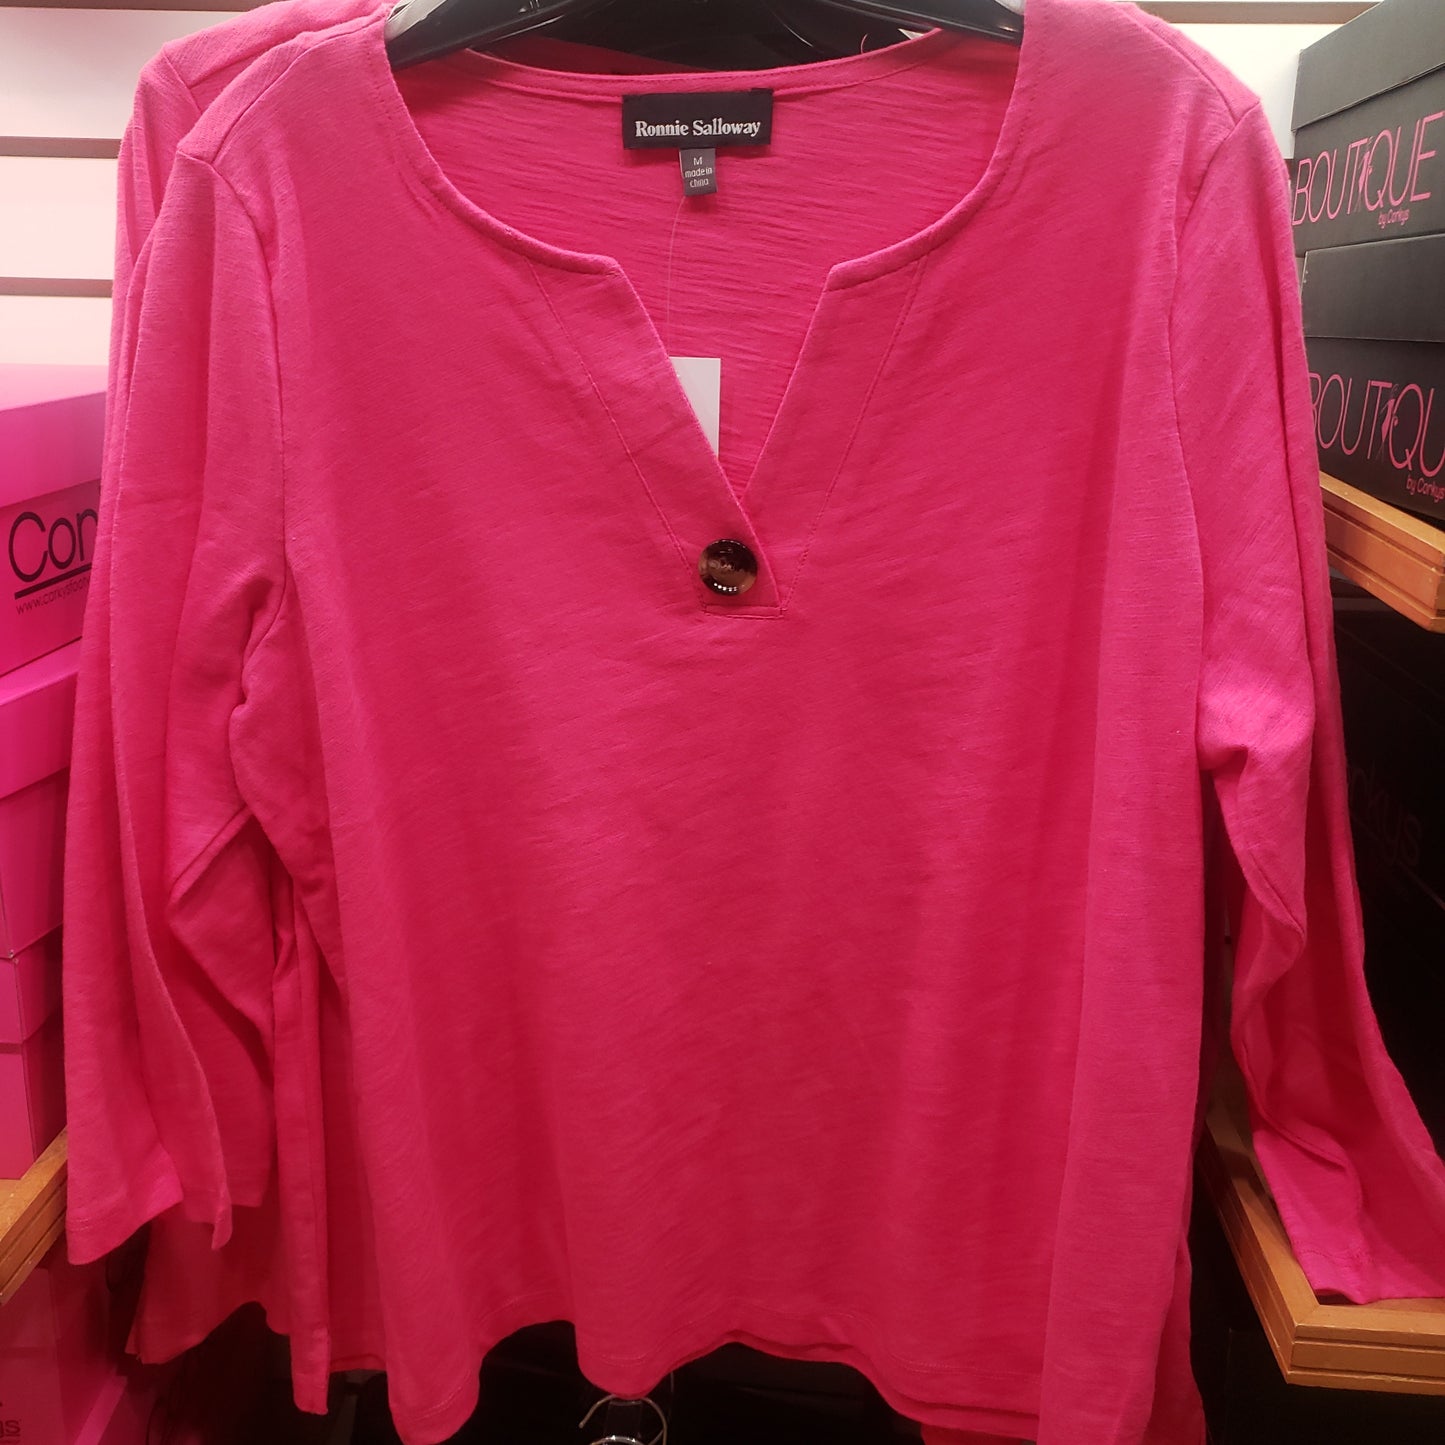 A 3/4 Cotton Top with Button Accent in Hot Pink by RONNIE SALLOWAY & CO INC is displayed on a hanger.